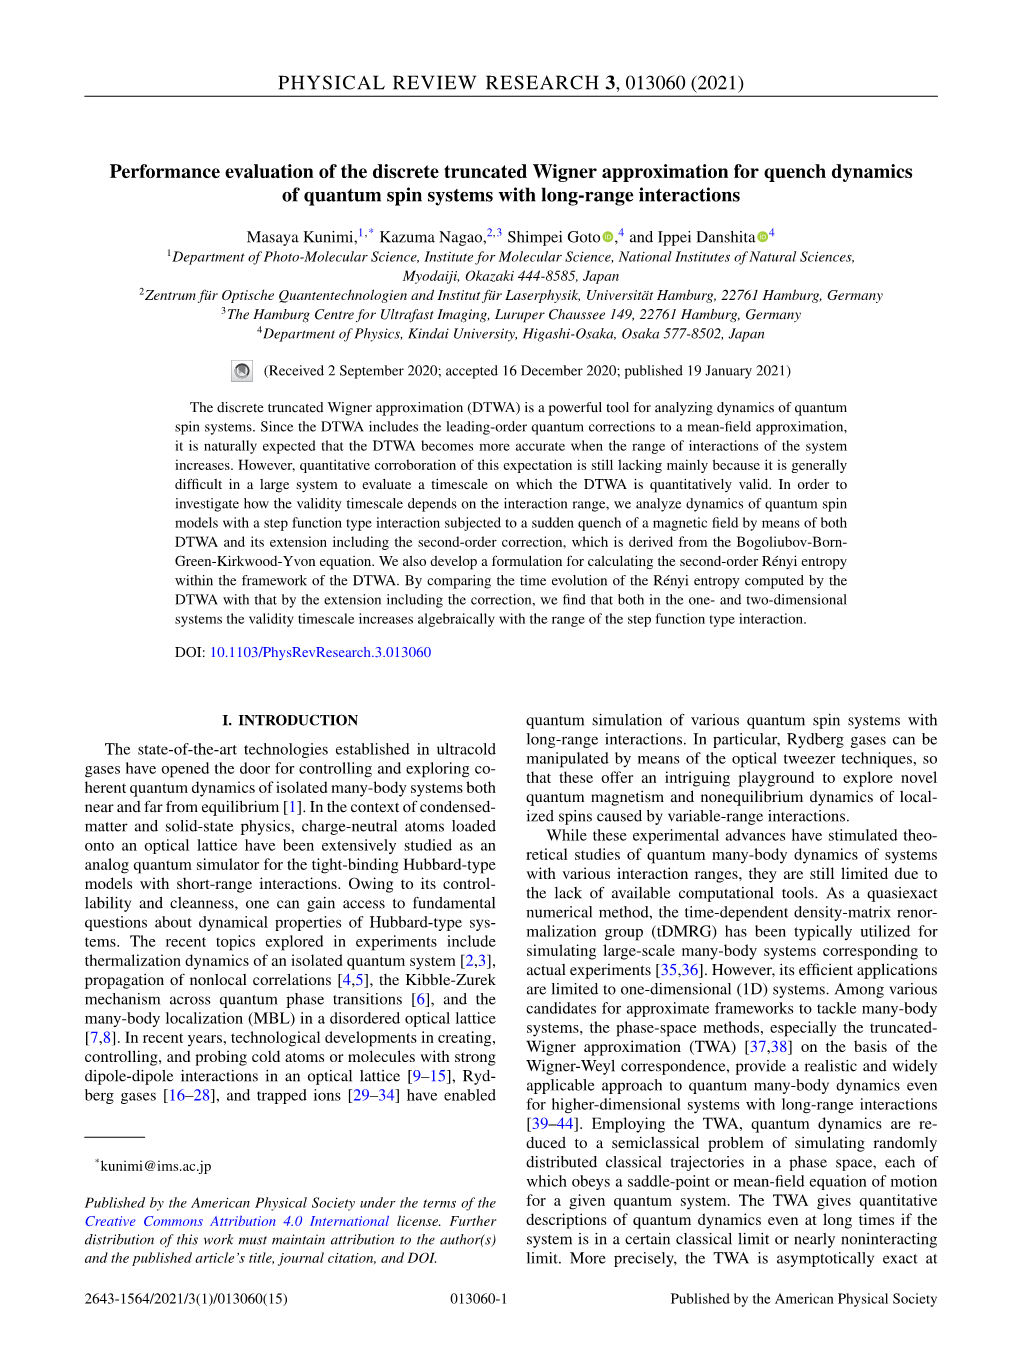 Performance Evaluation of the Discrete Truncated Wigner Approximation for Quench Dynamics of Quantum Spin Systems with Long-Range Interactions